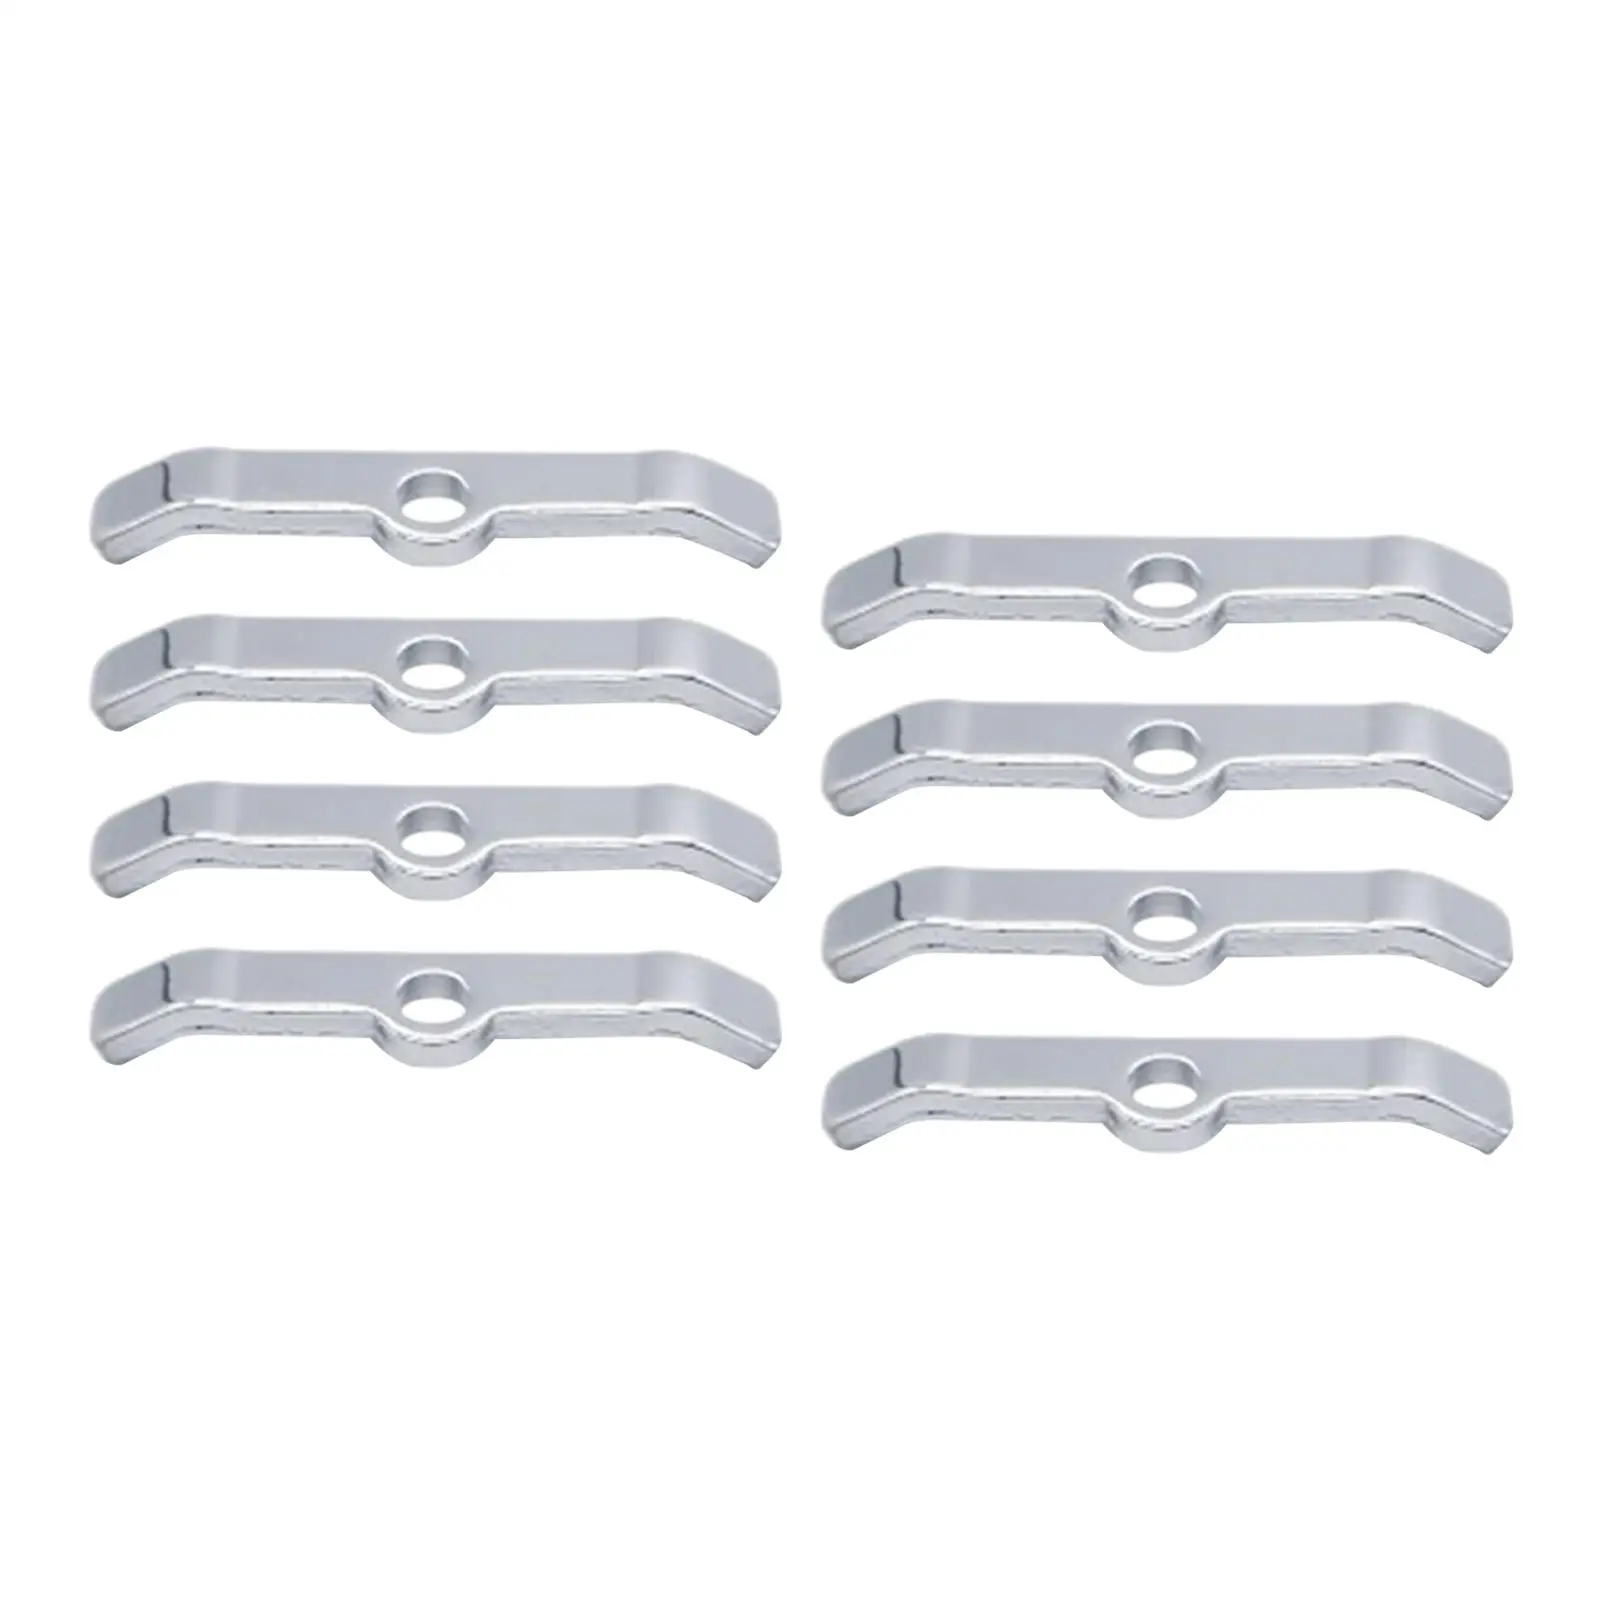 8 Pieces 3 Inches Cover Spreader Bars Fit for Sbc 283 305 327 350 Aluminum ,Exquisite Workmanship Easy to Install